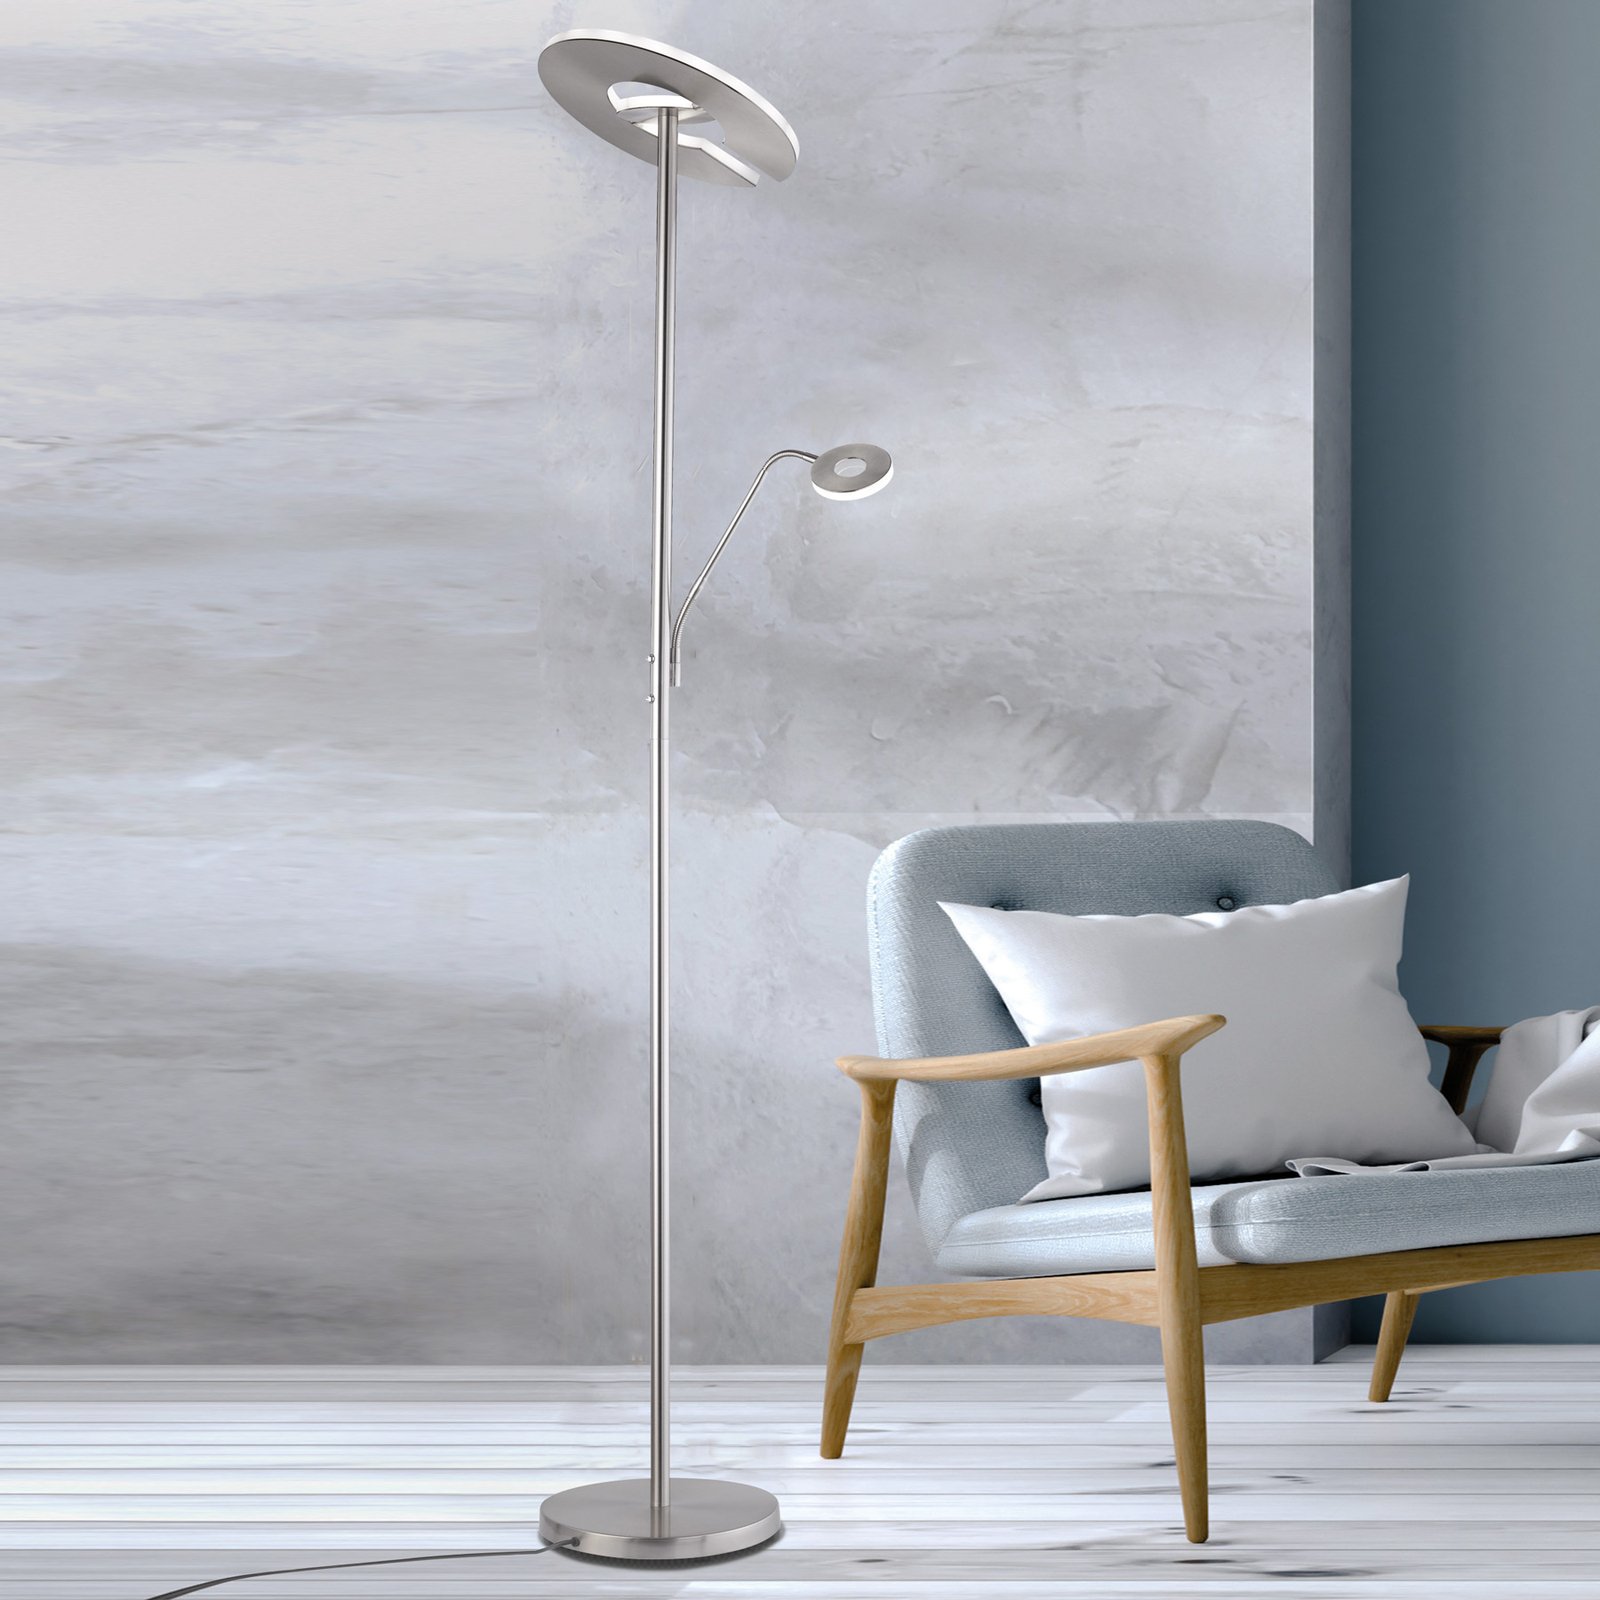 Dent LED uplighter floor lamp with a reading lamp, CCT, nickel